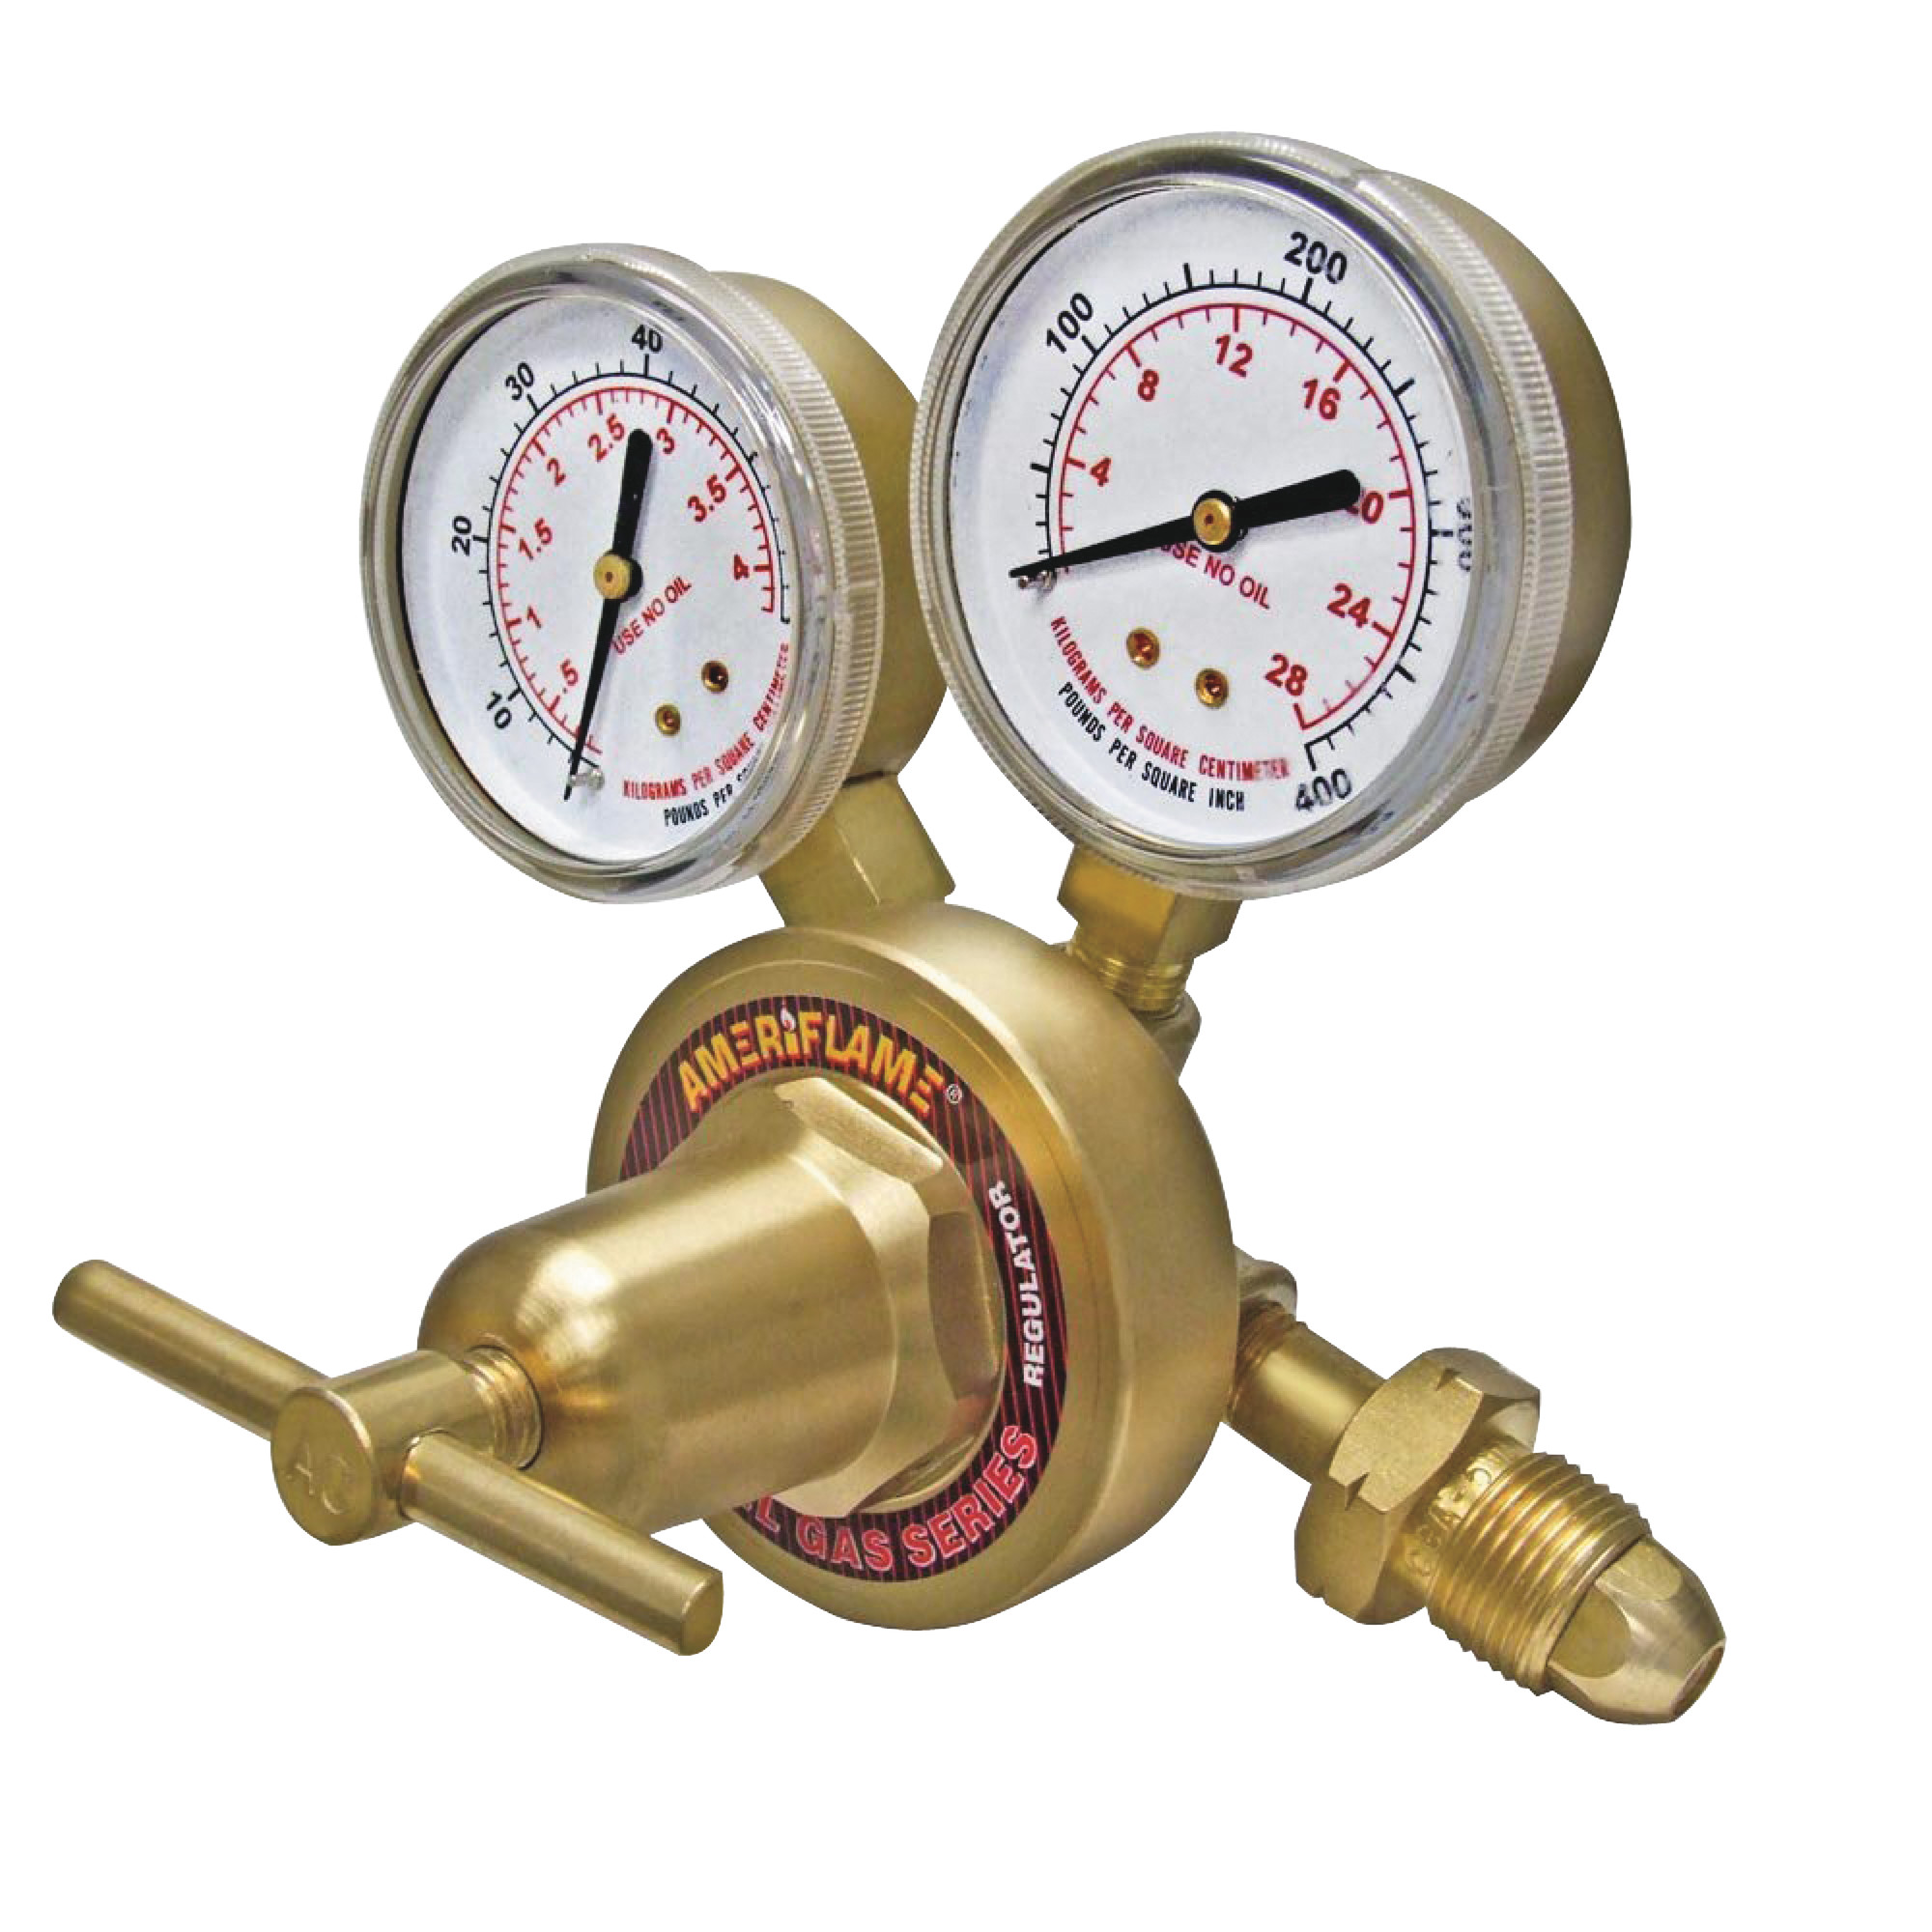 Heavy Duty Single Stage Propane Gas Regulator With 2-1/2" Dual Scale Gauges